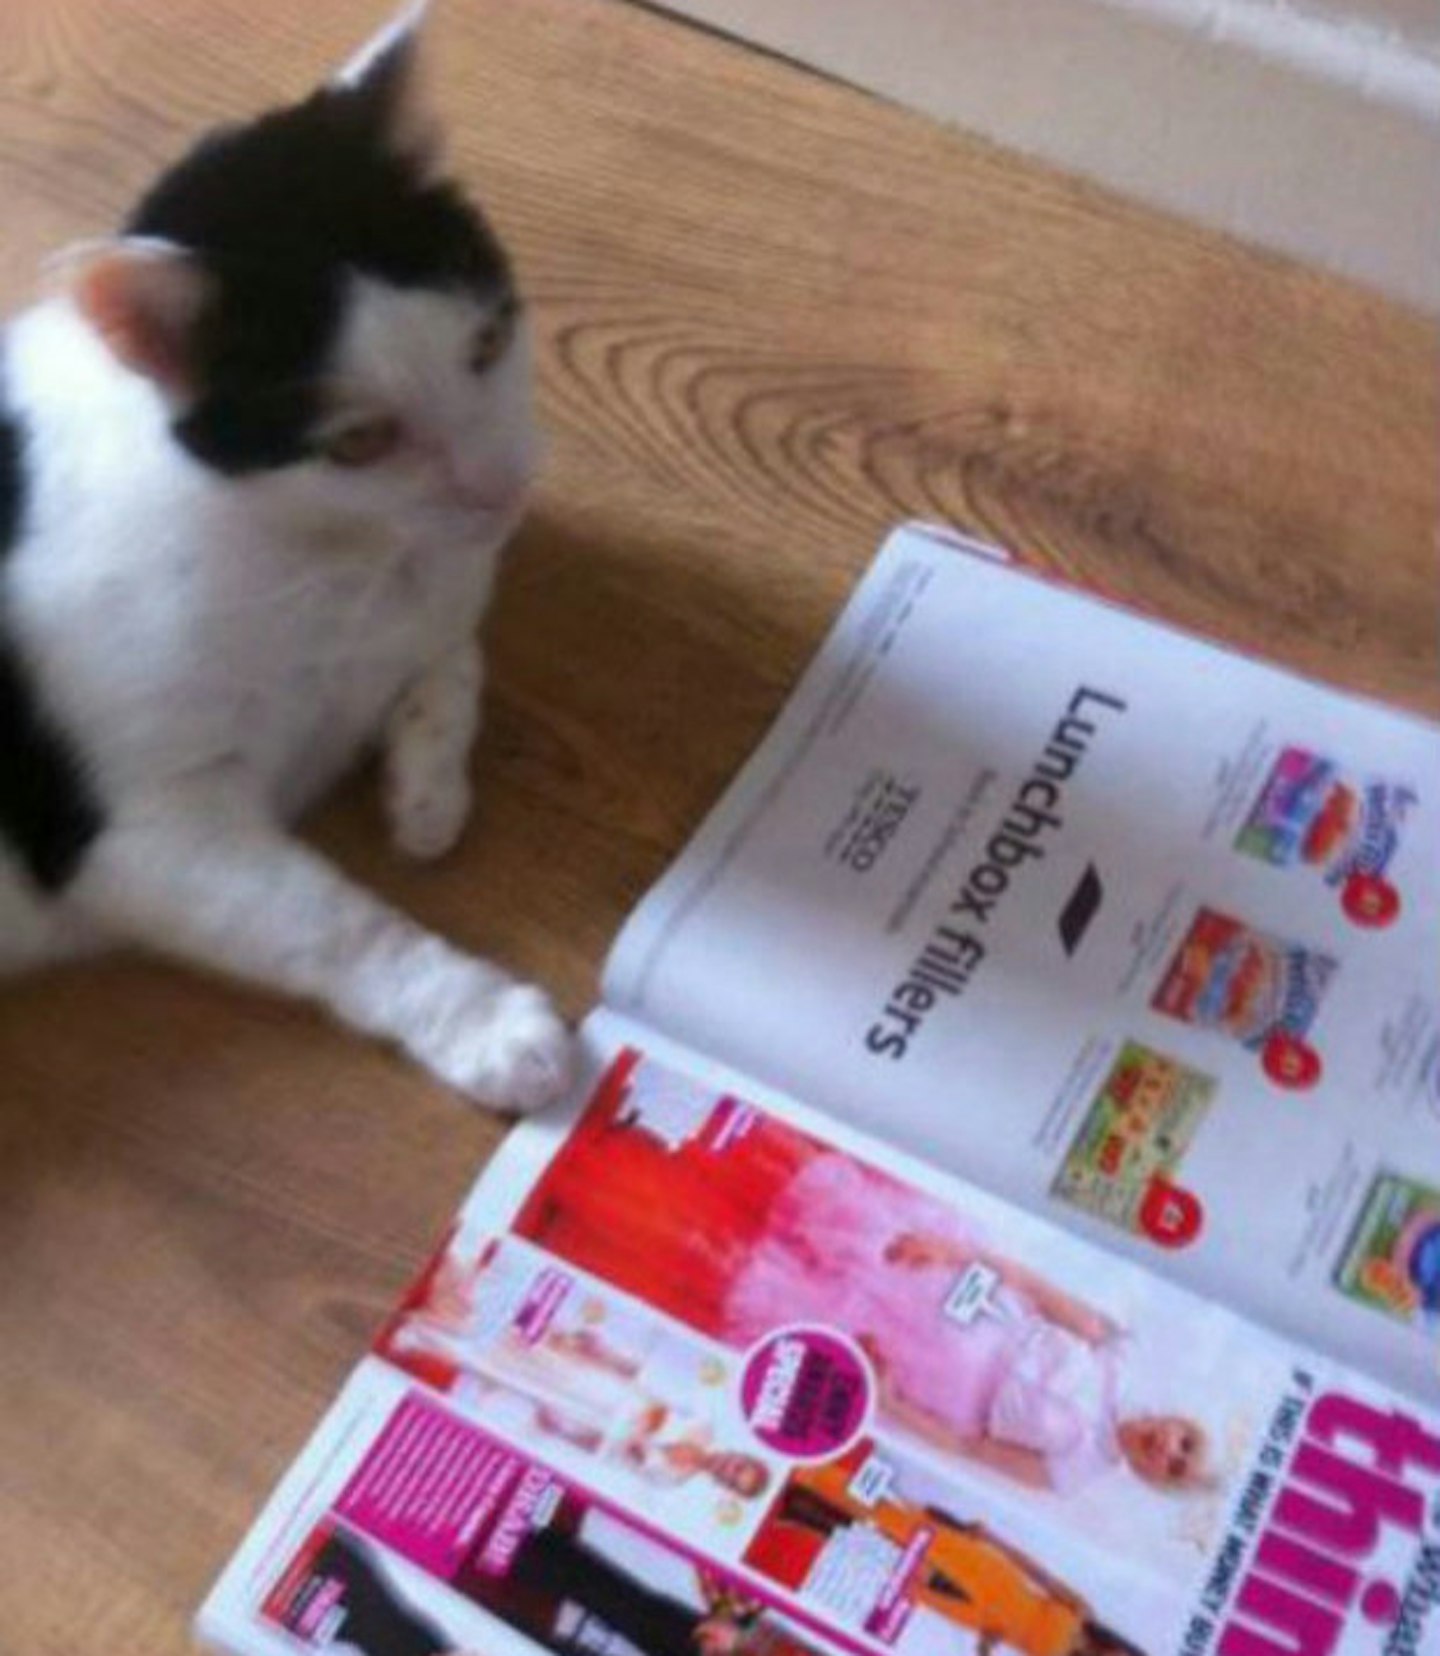 Cooper was reading this week's heat and couldn't BELIEVE what Katherine Heigl was wearing!